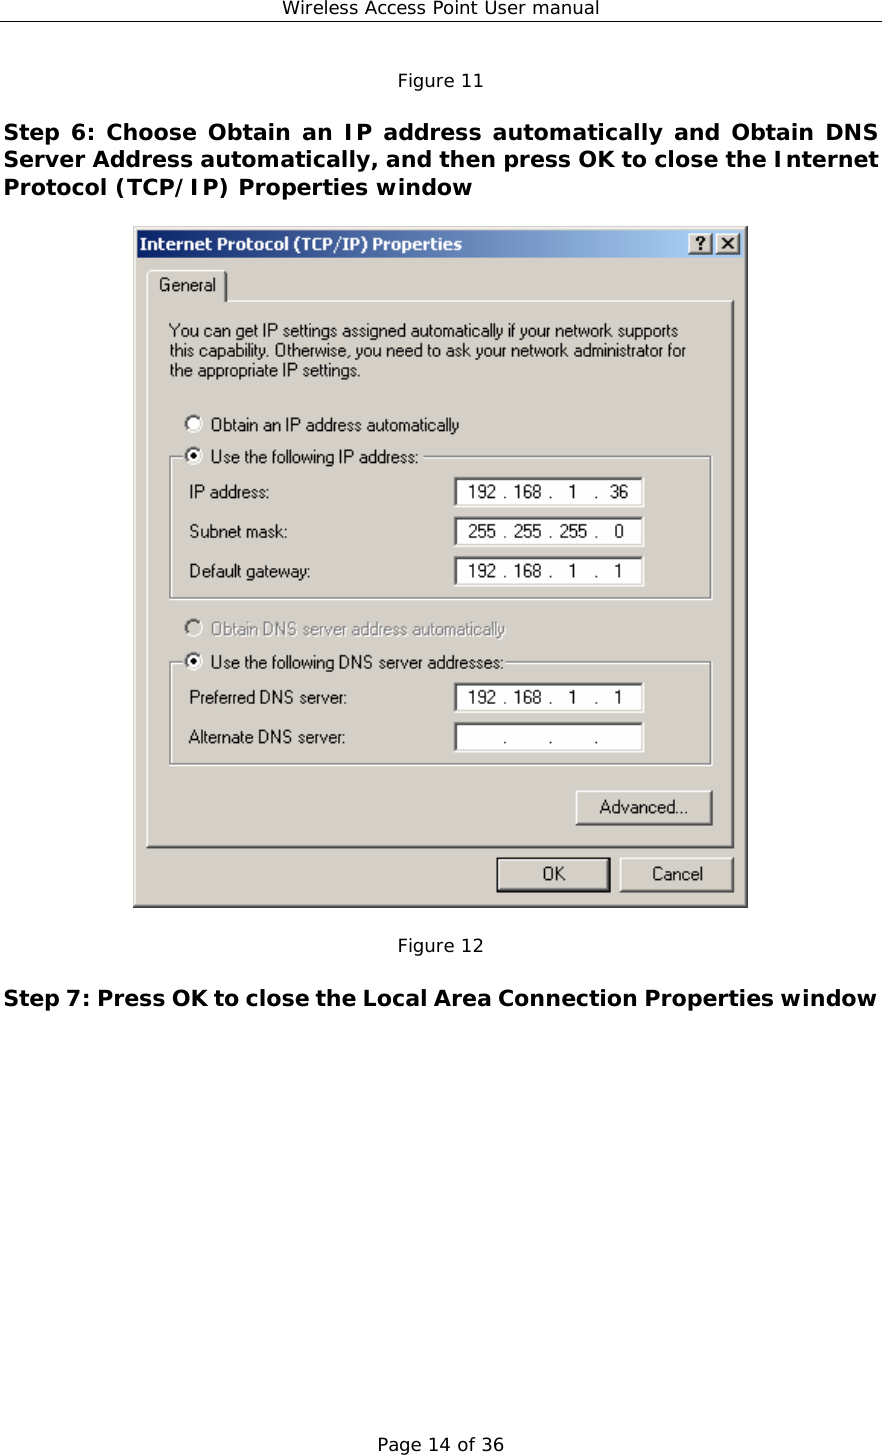 Wireless Access Point User manual Page 14 of 36 Figure 11  Step 6: Choose Obtain an IP address automatically and Obtain DNS Server Address automatically, and then press OK to close the Internet Protocol (TCP/IP) Properties window    Figure 12  Step 7: Press OK to close the Local Area Connection Properties window  